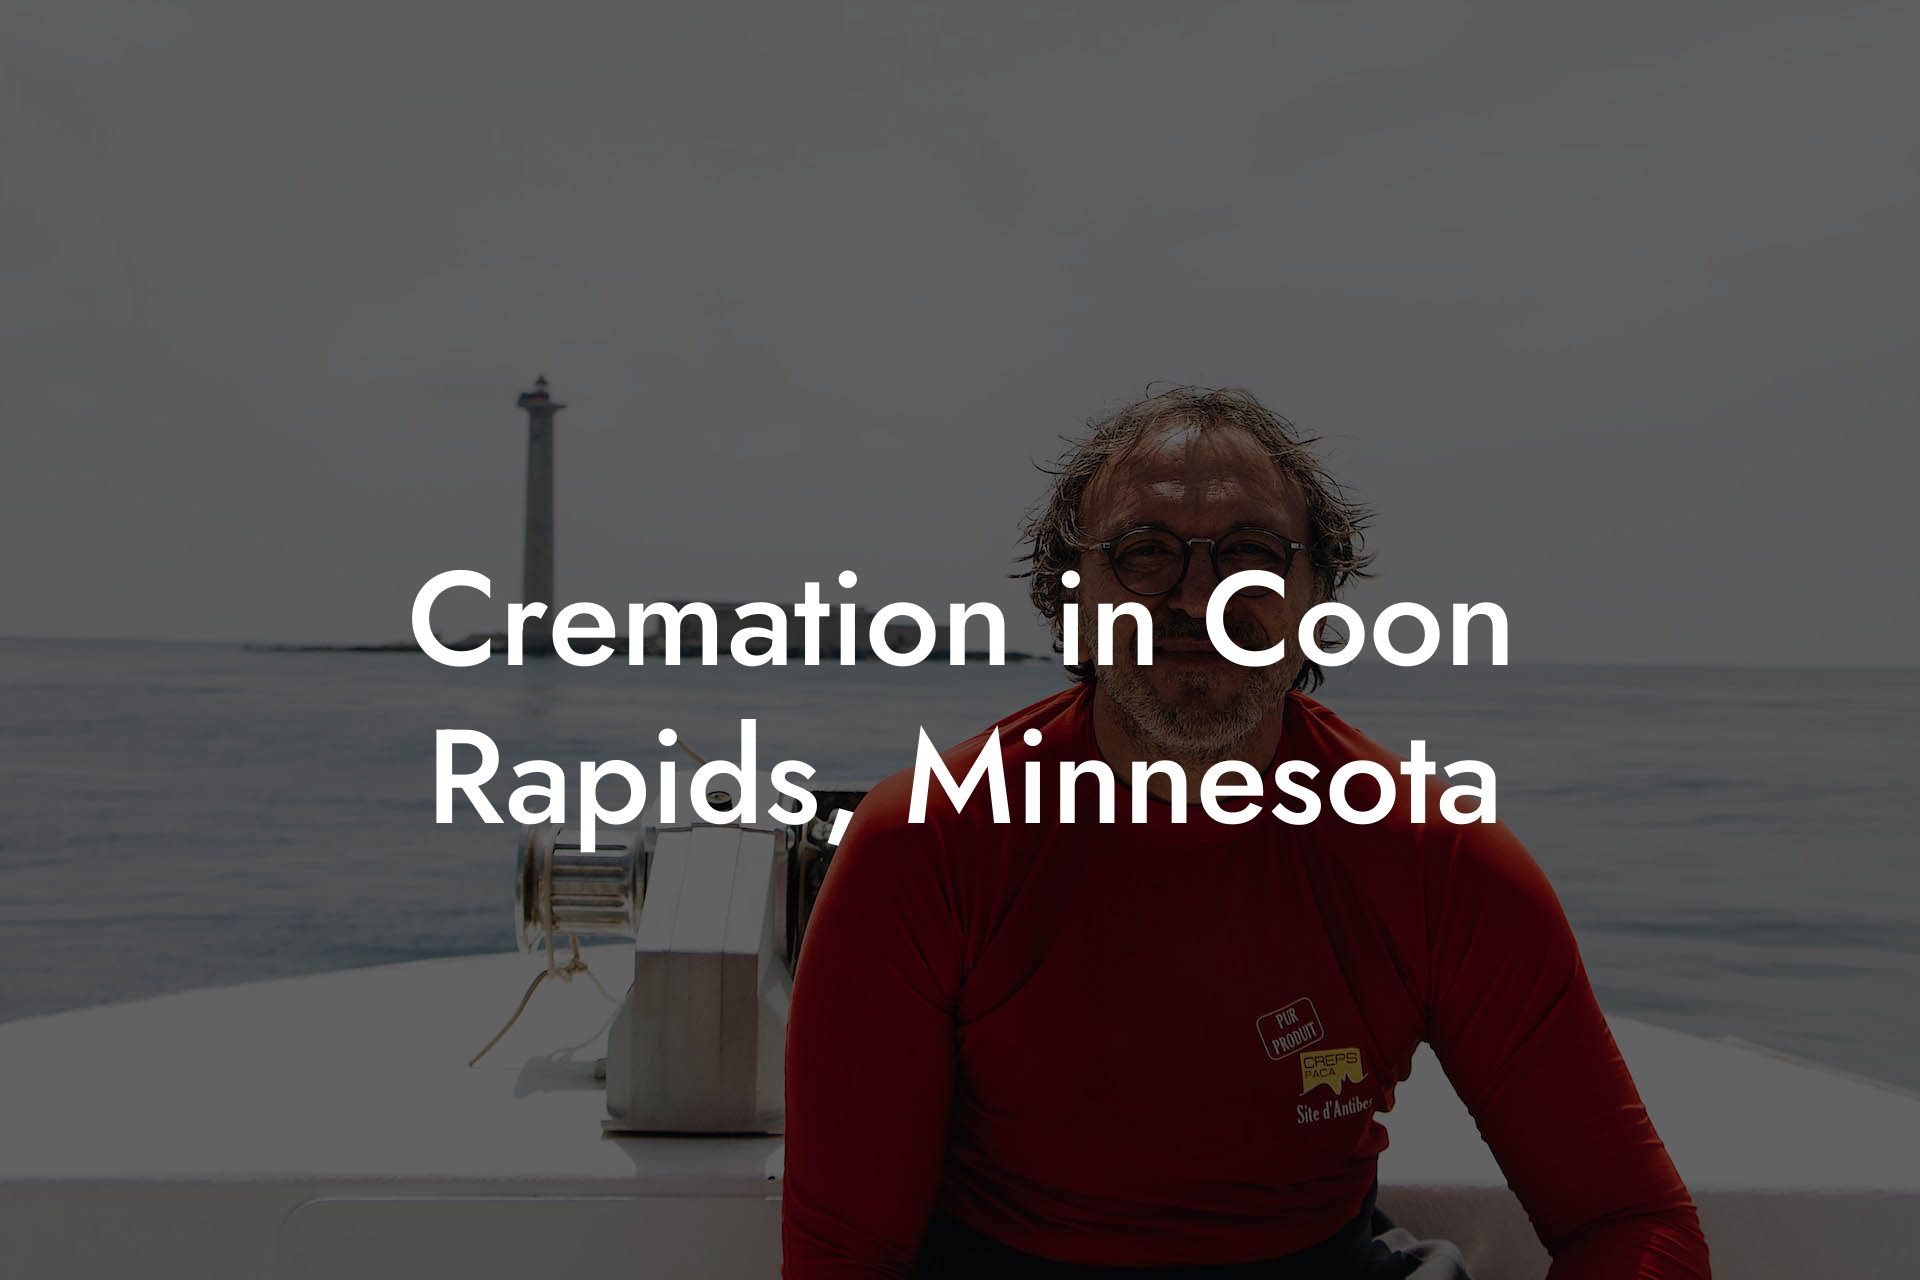 Cremation in Coon Rapids, Minnesota